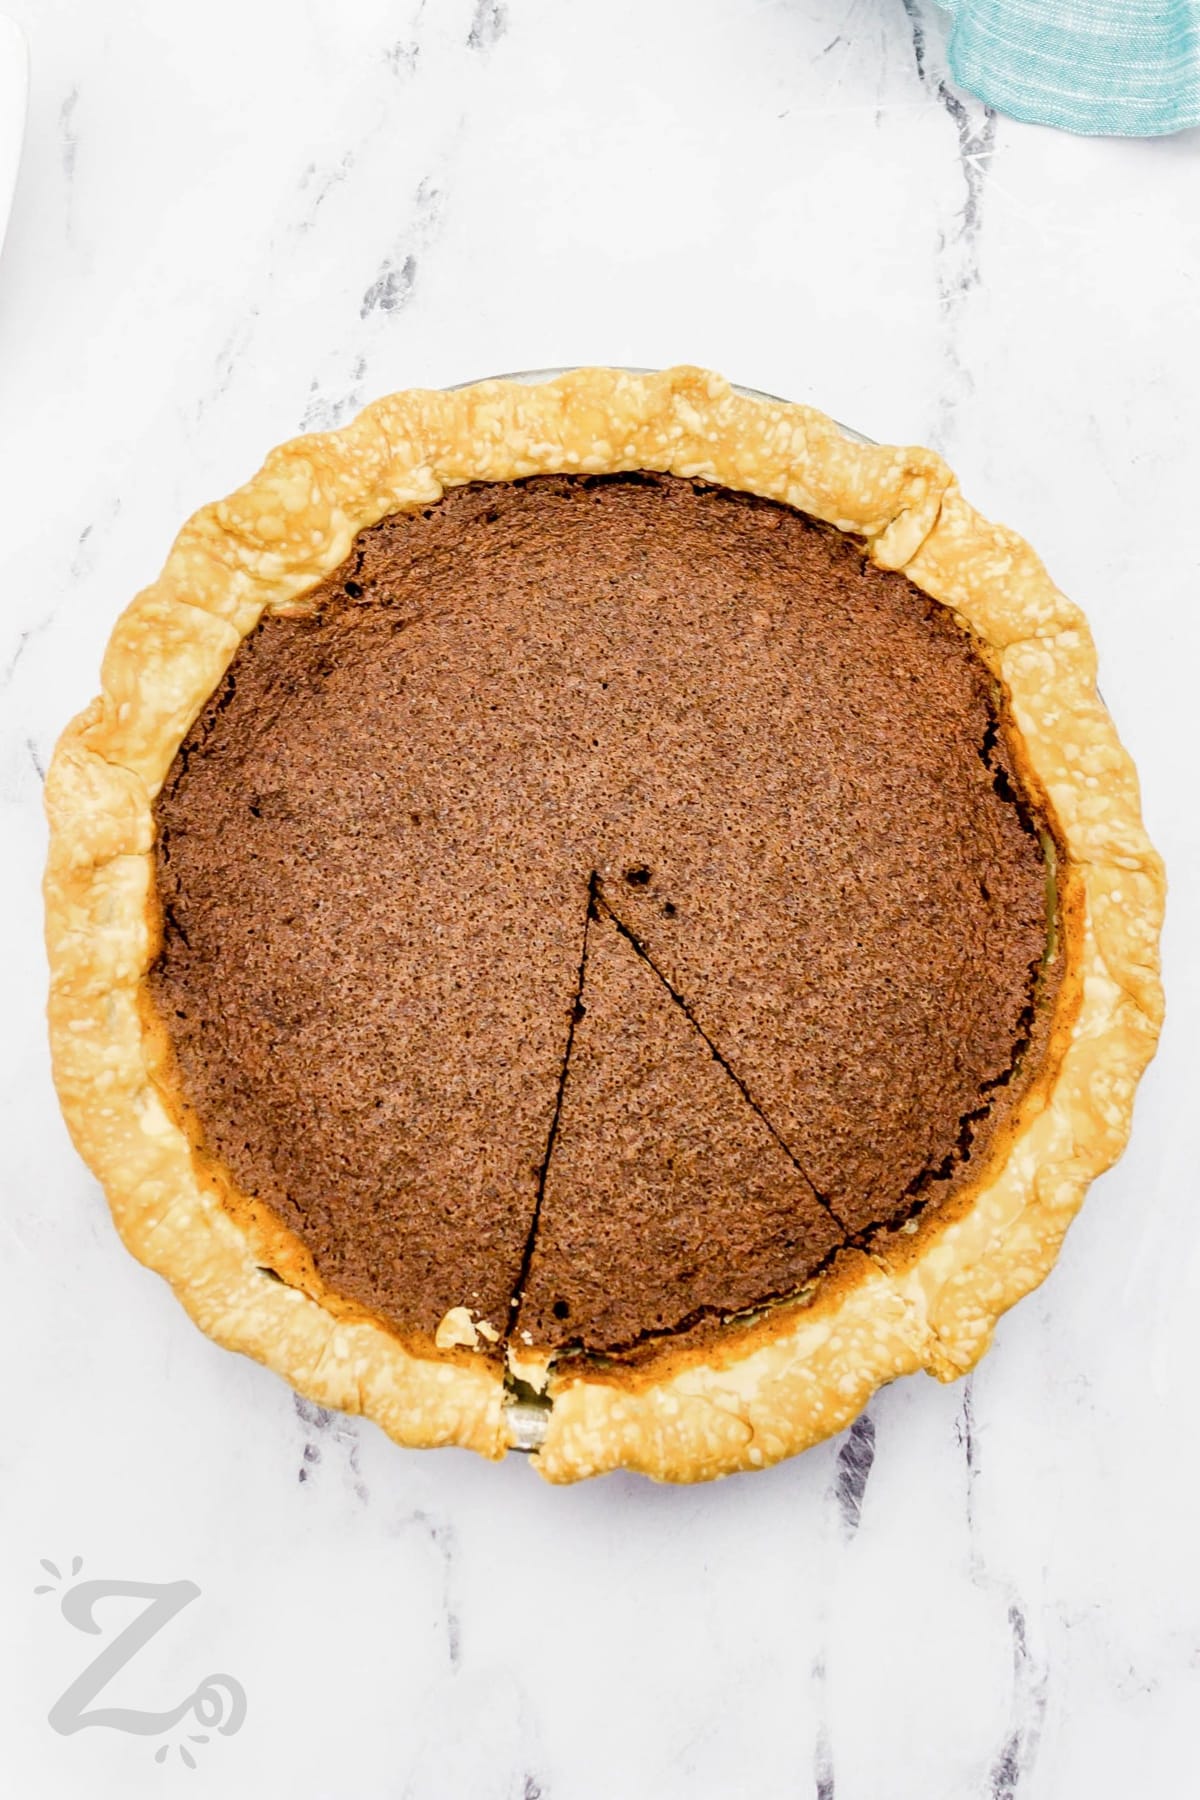 A slice cut out of a chocolate chess pie